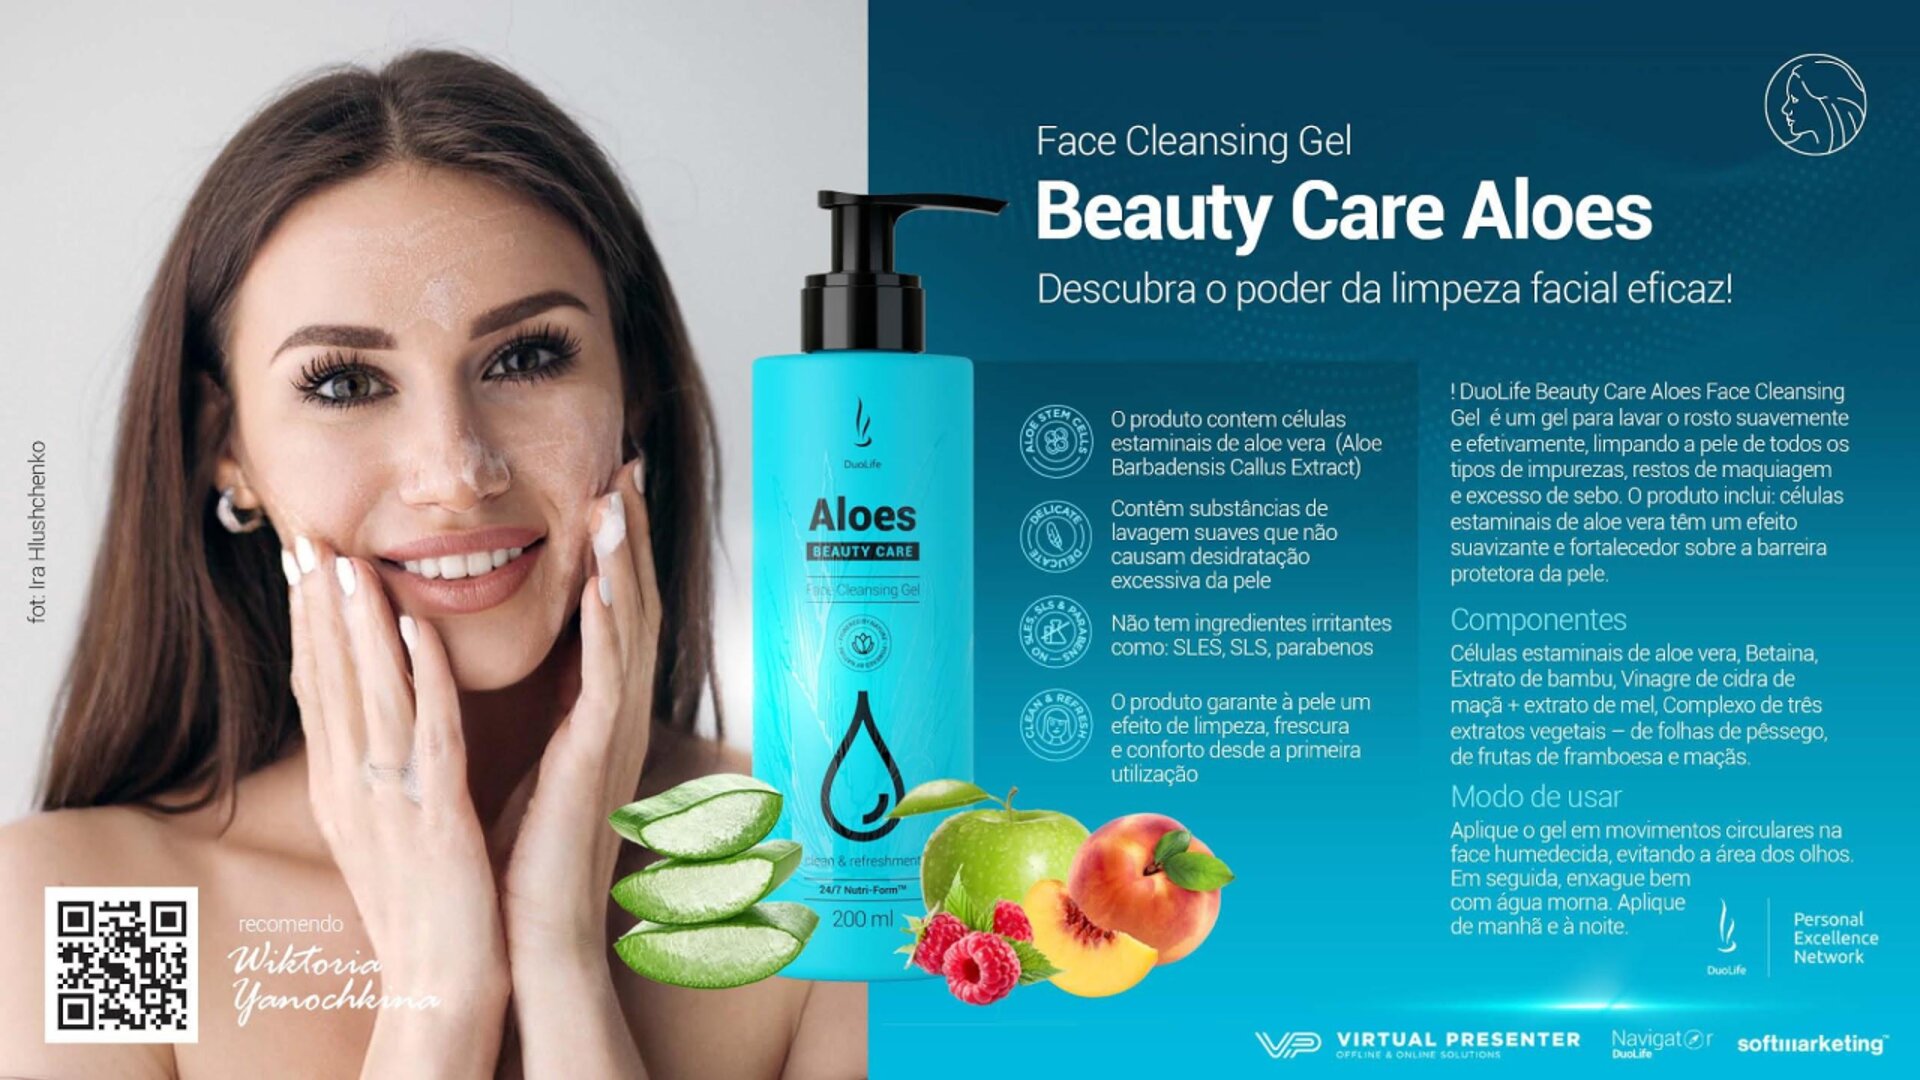 eauty Care Aloes - Face Cleansing Gel